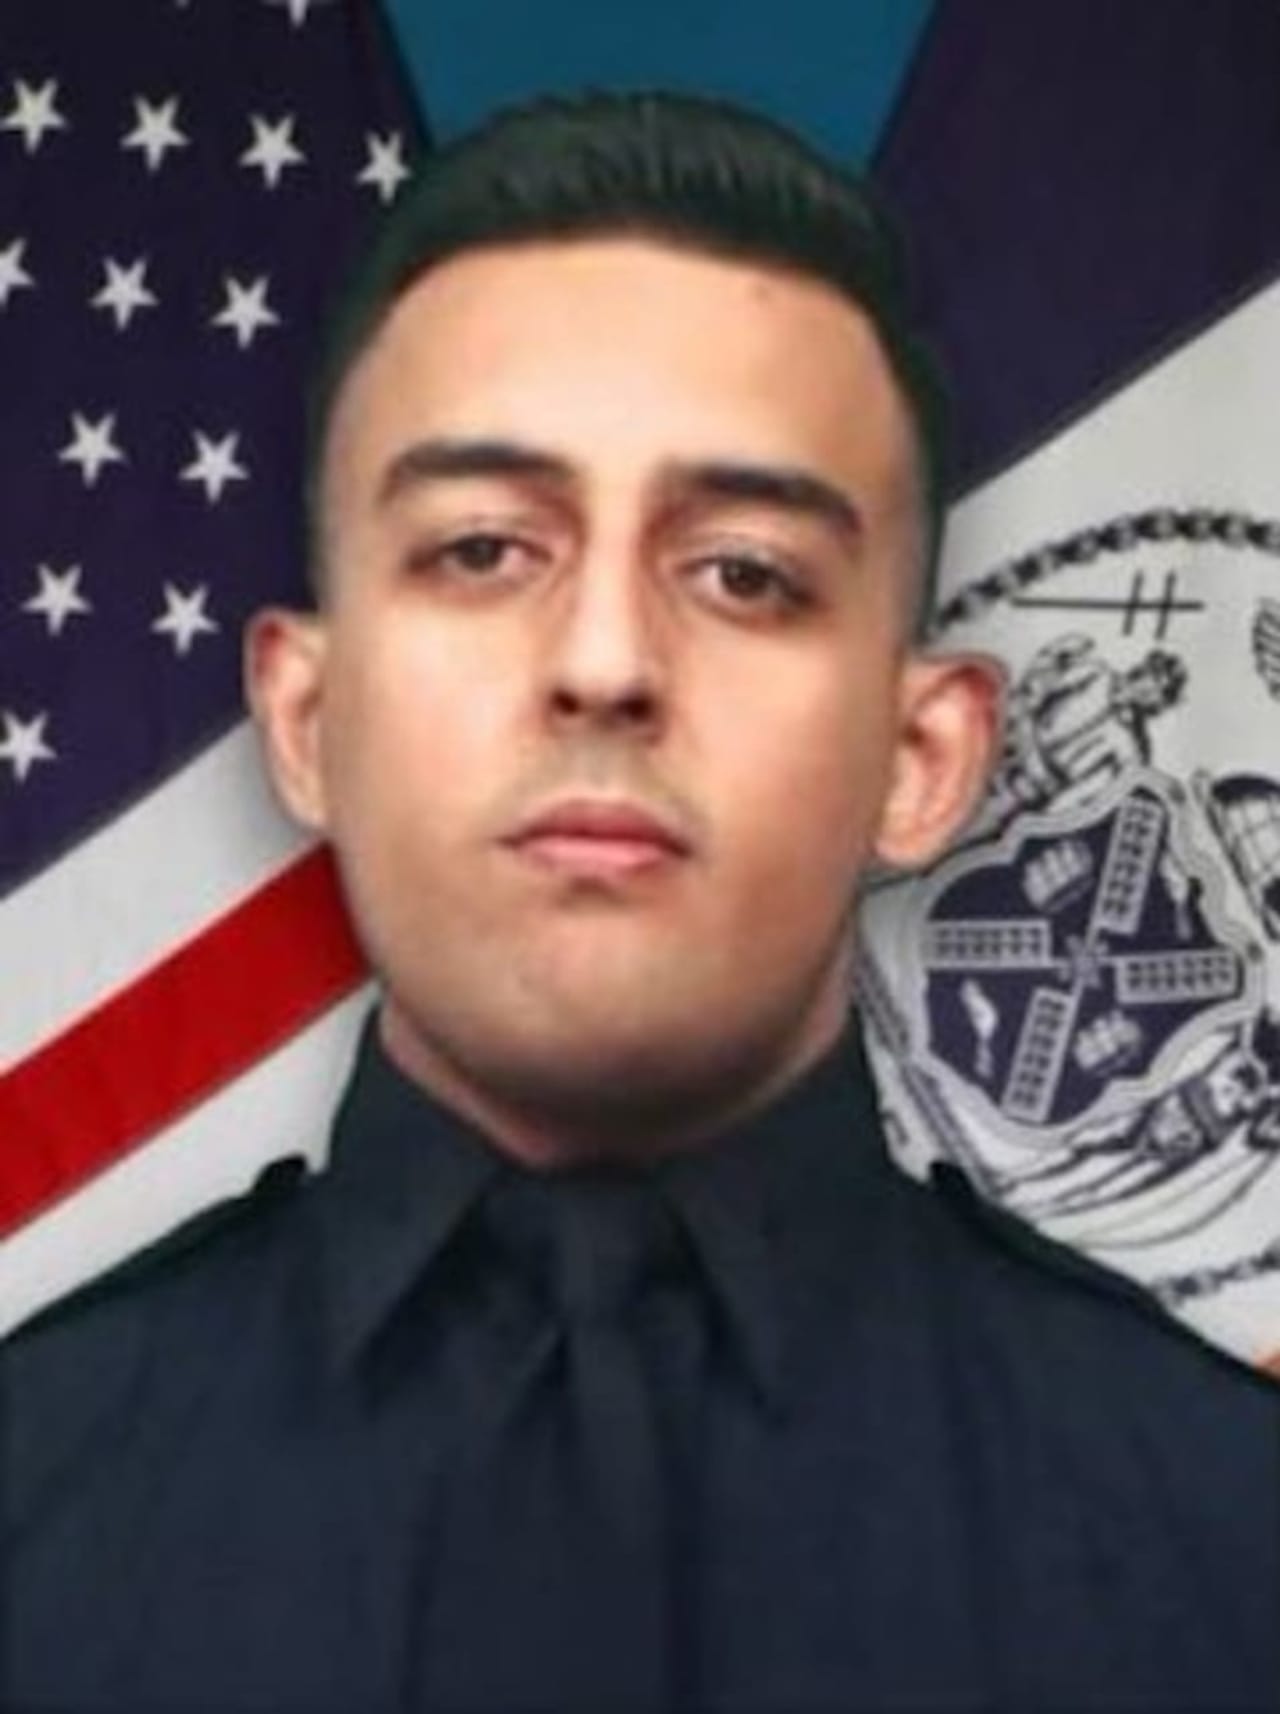 NYPD Officer Adeed Fayaz has died from the injuries he suffered when shot during an attempted robbery.